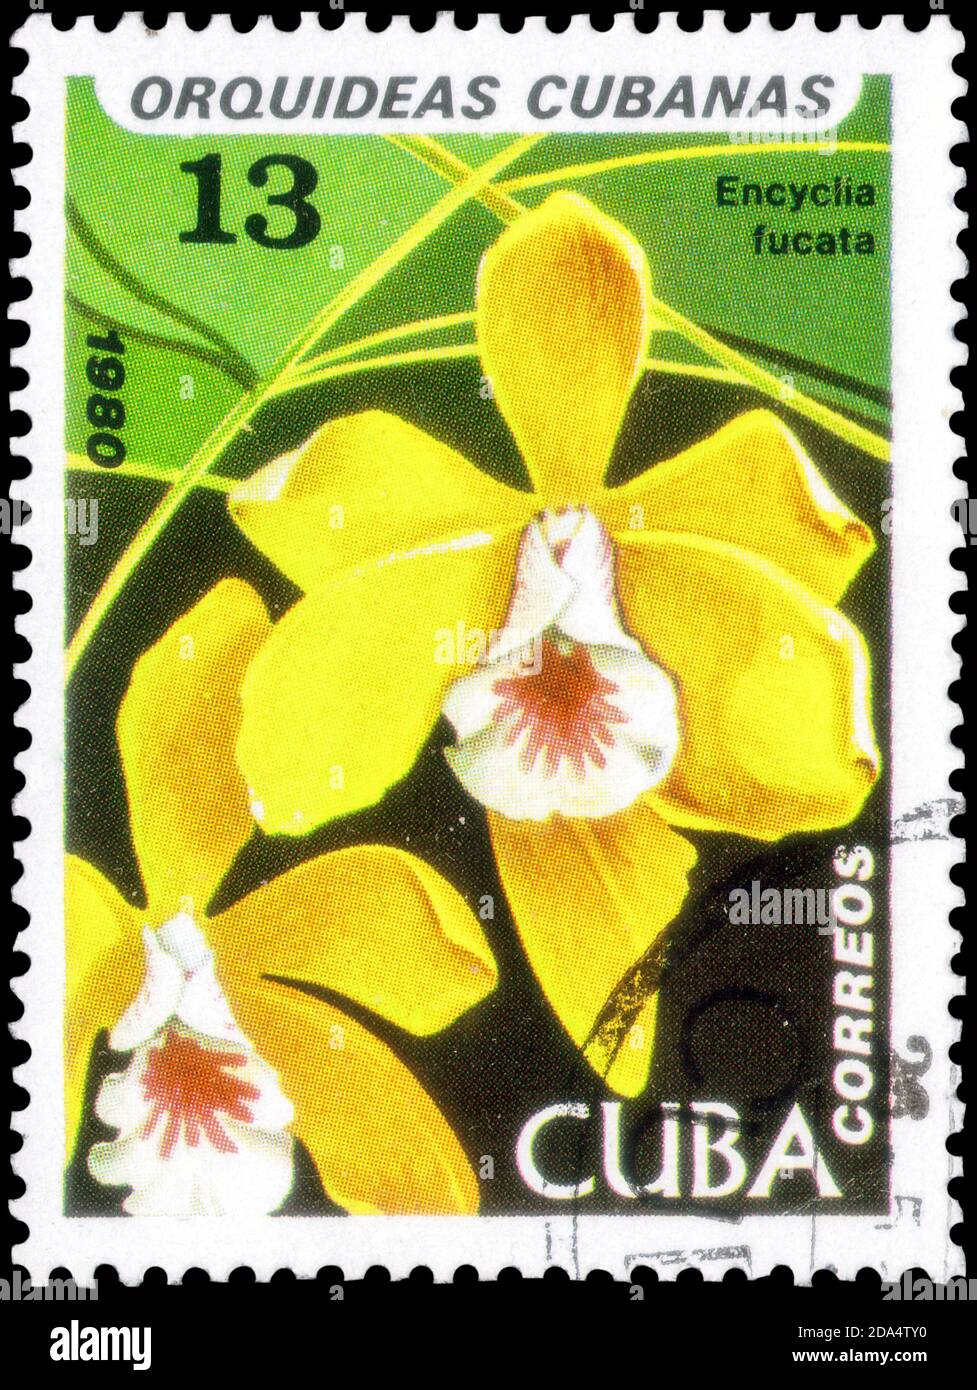 Saint Petersburg, Russia - September 18, 2020: Stamp printed in the Cuba with the image of the Encyclia fucata, circa 1980 Stock Photo